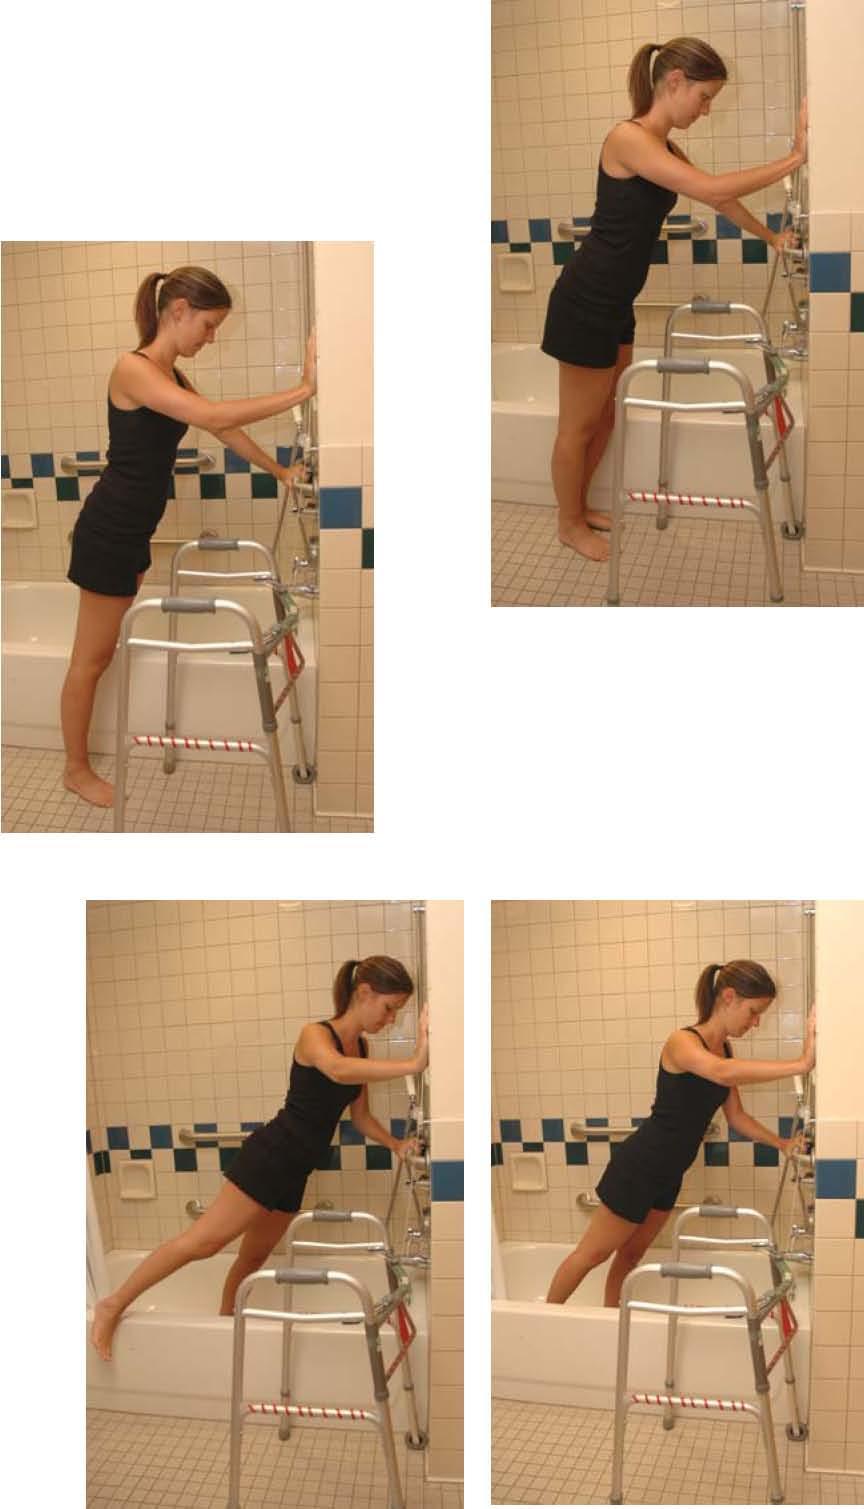 Standing Tub Transfer After Hip Surgery 1. Align walker next to tub and use wall, sink or grab bar to support yourself. 2. Step into tub with non-surgical leg first. 3.